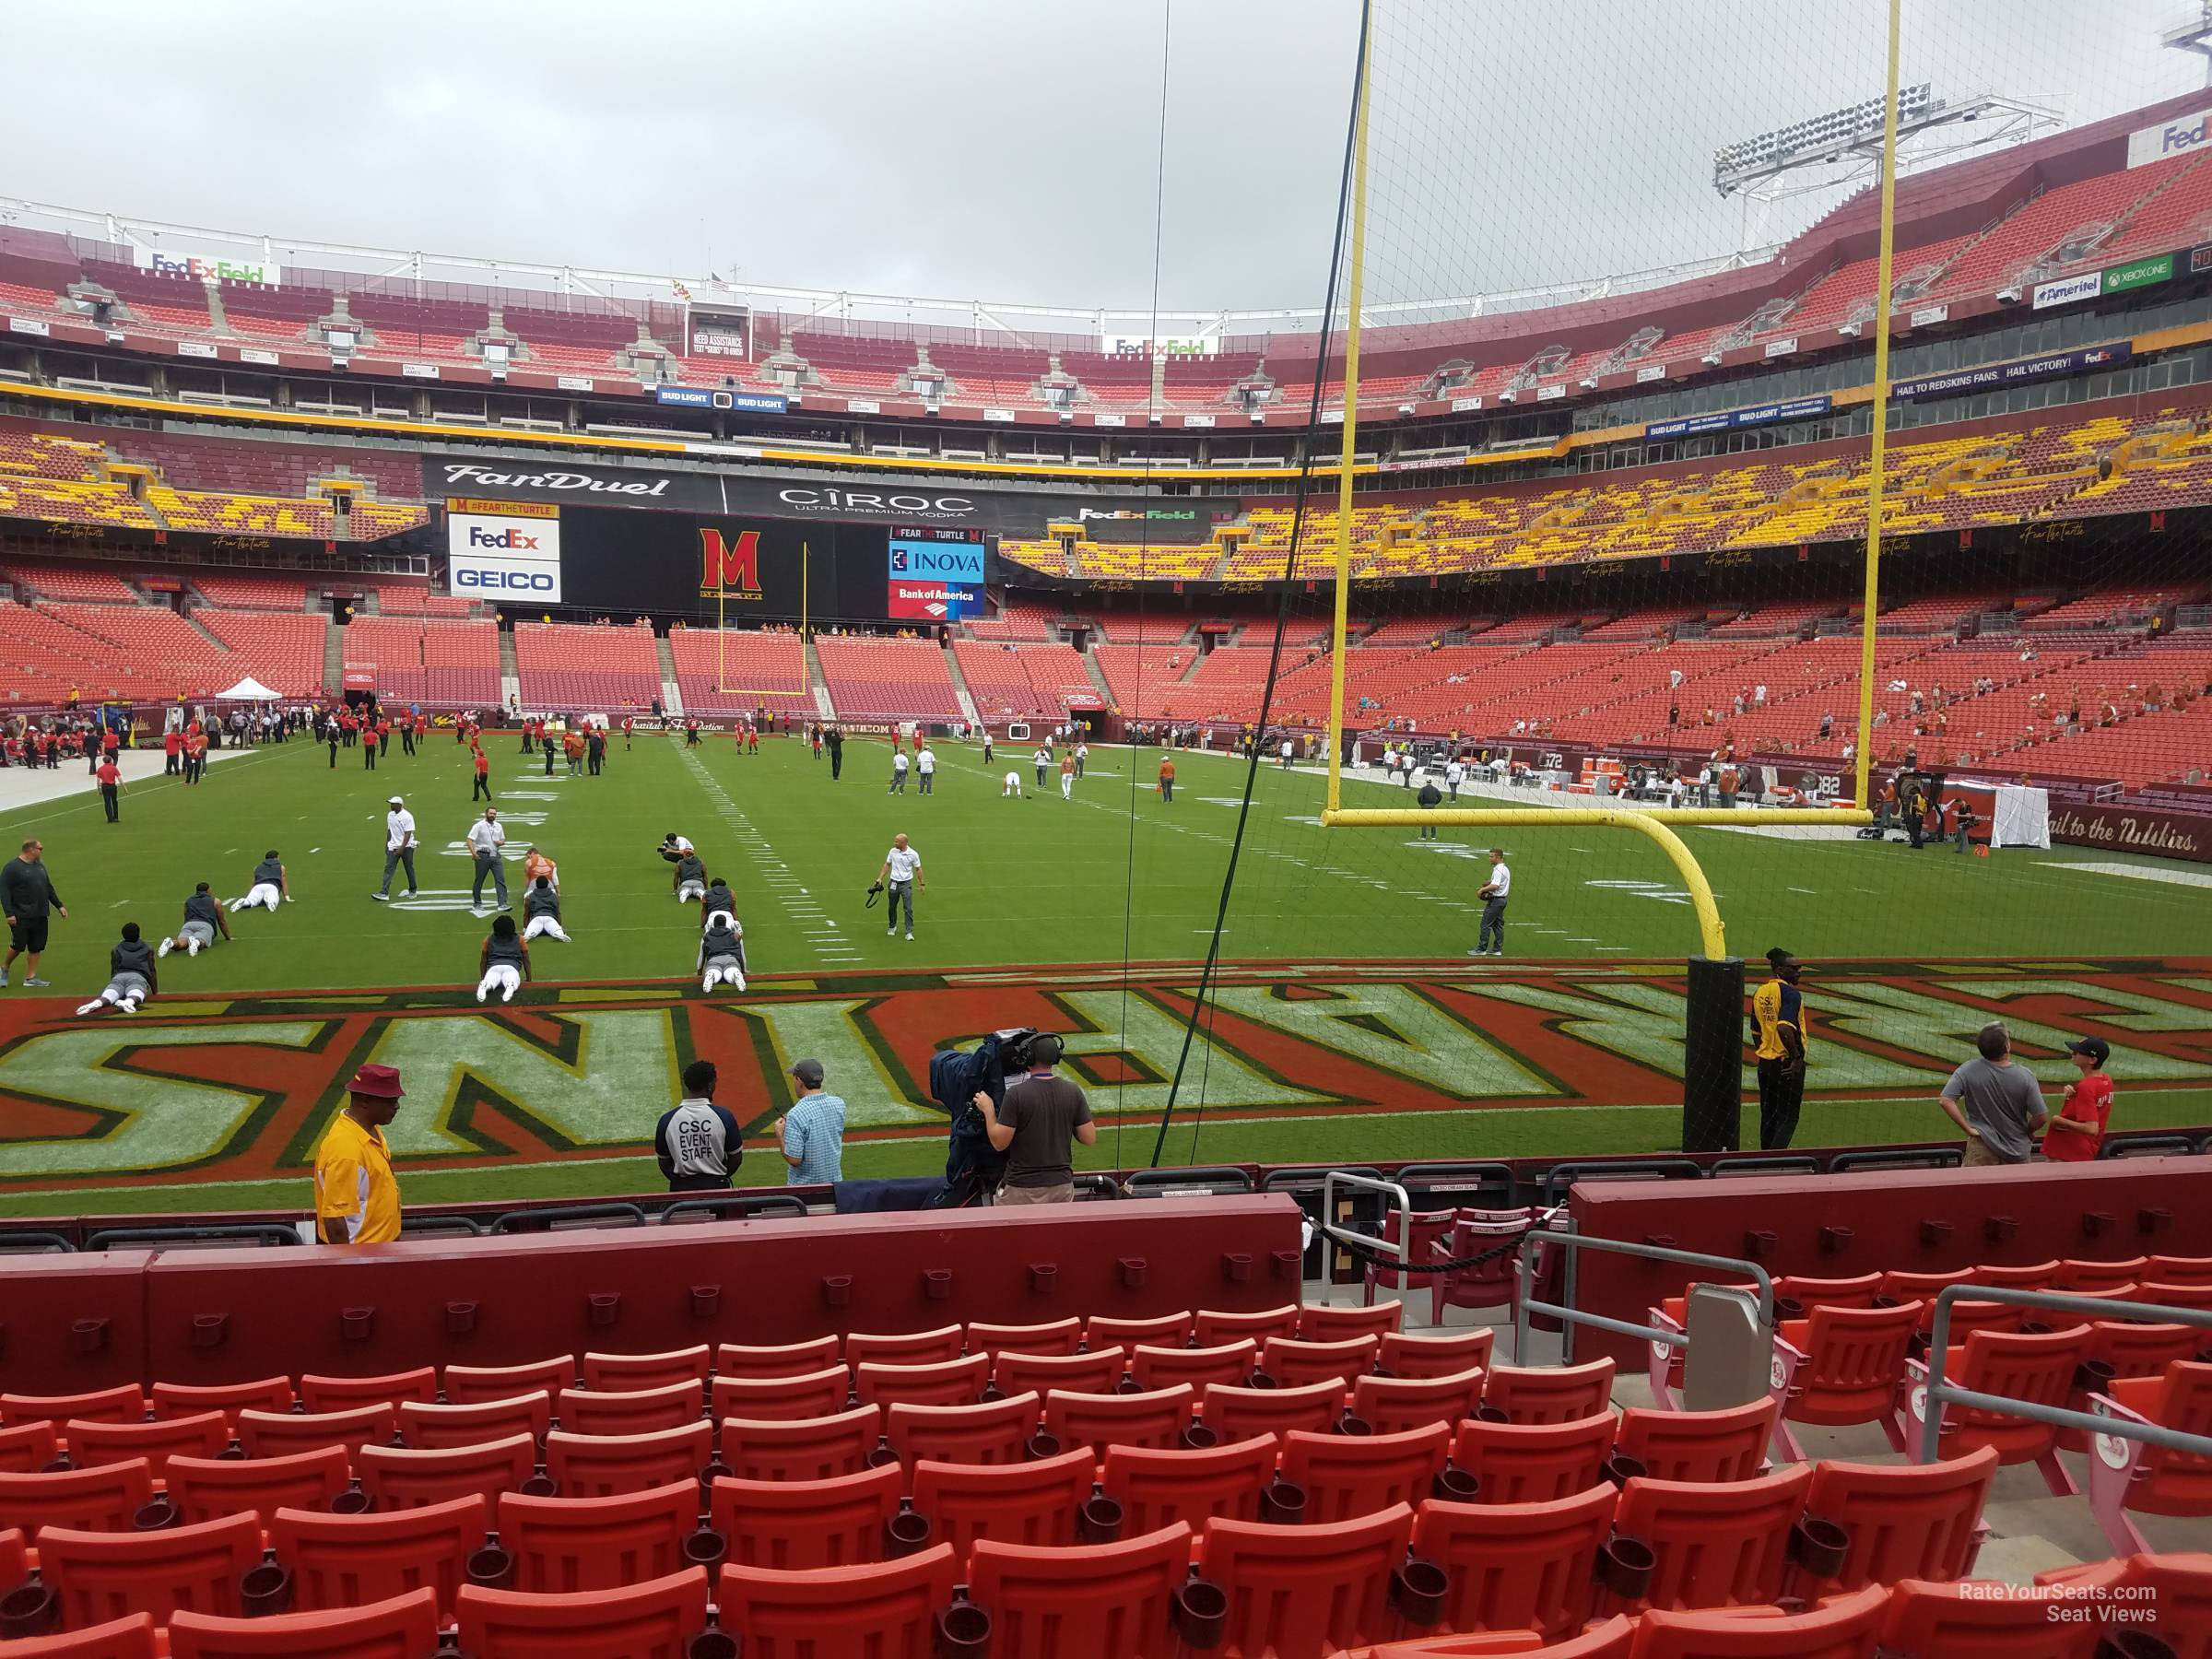 section 133, row 13 seat view  - fedexfield